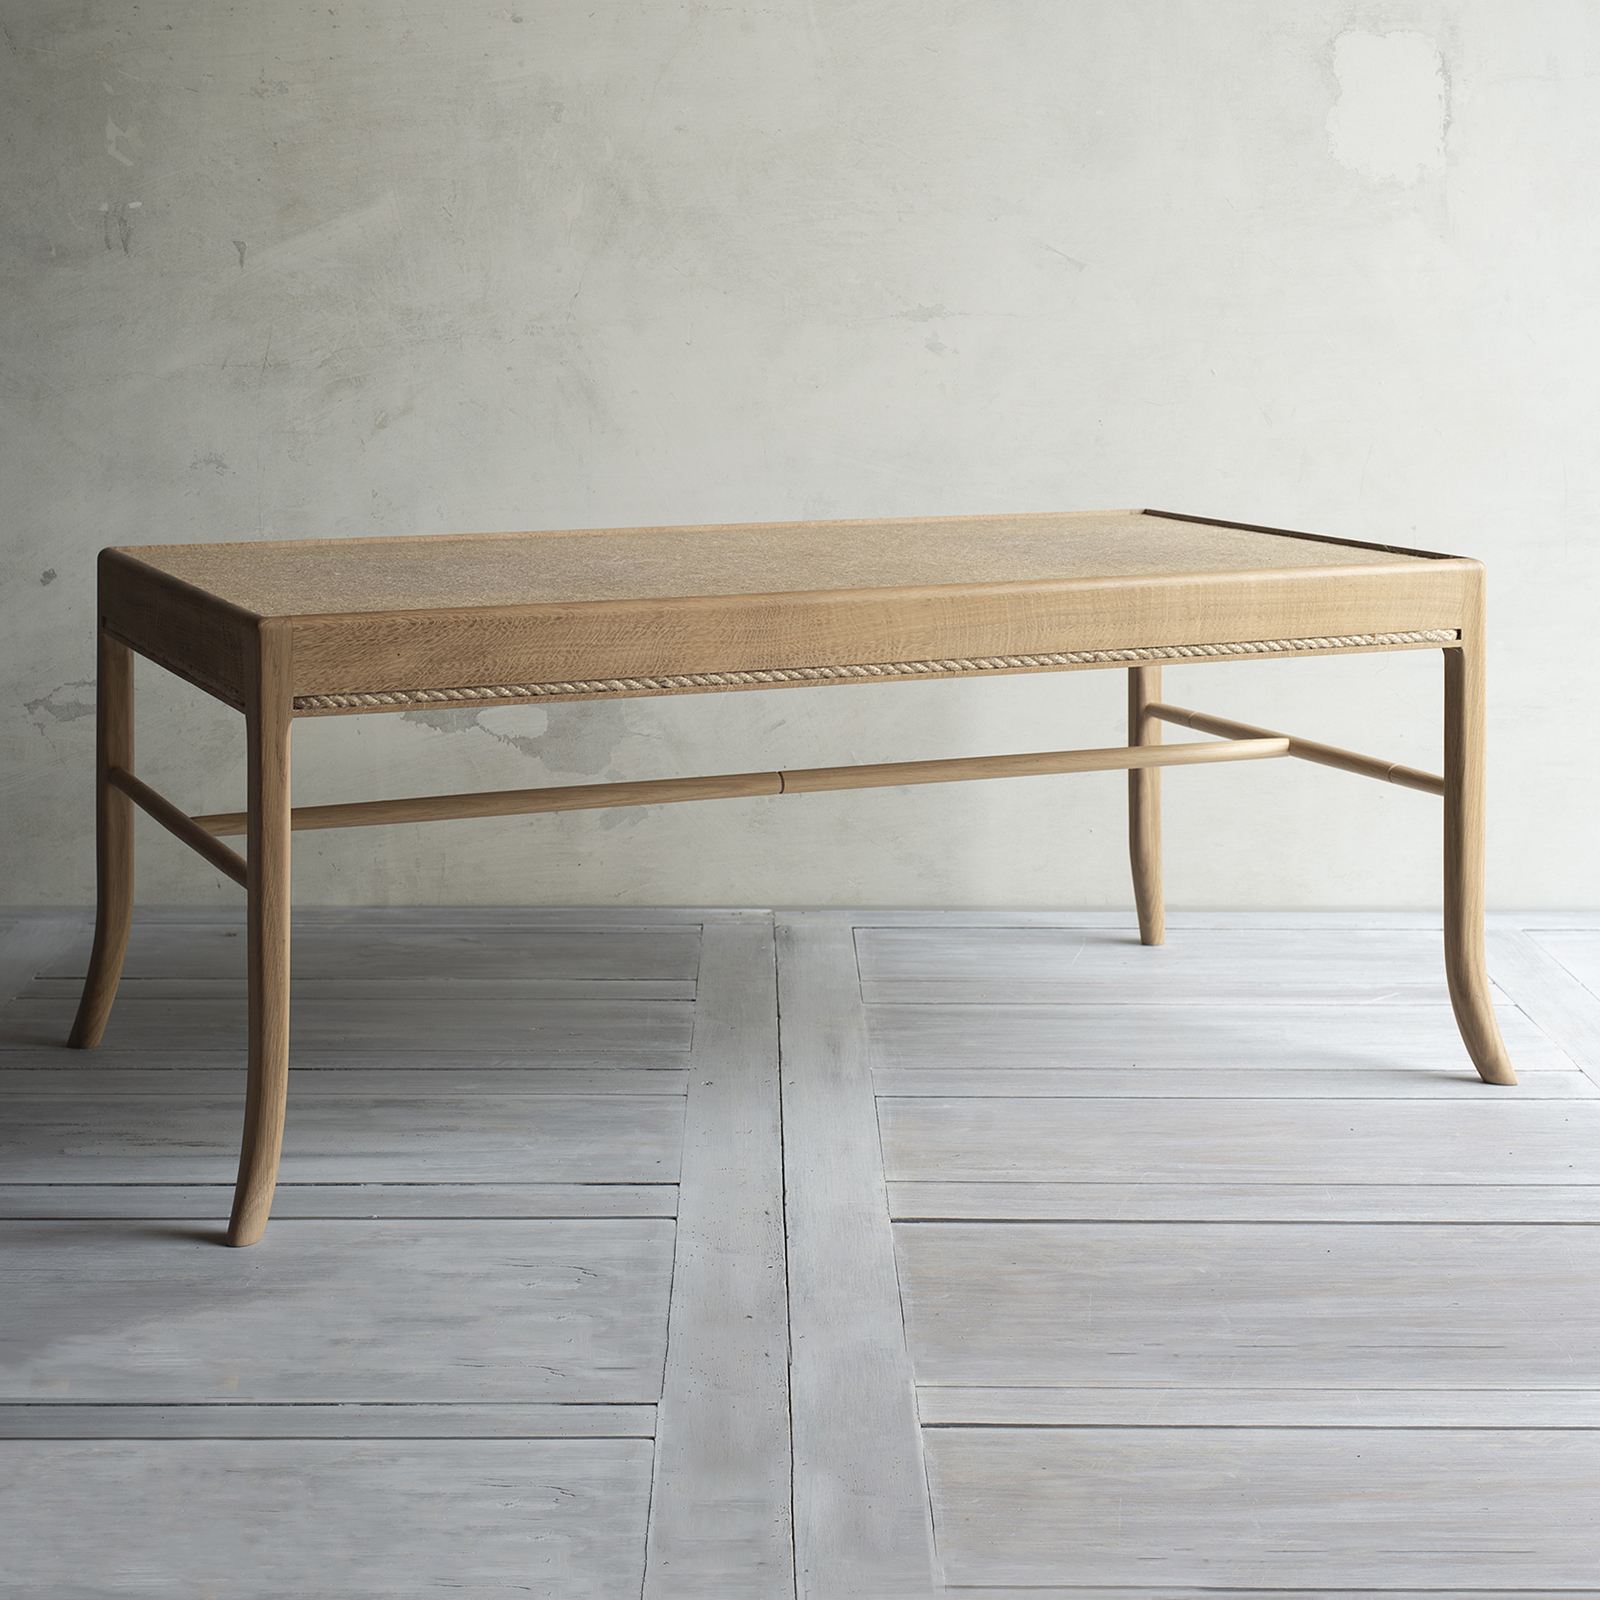 Lavenham coffee table.  Made to order by Perceval Designs